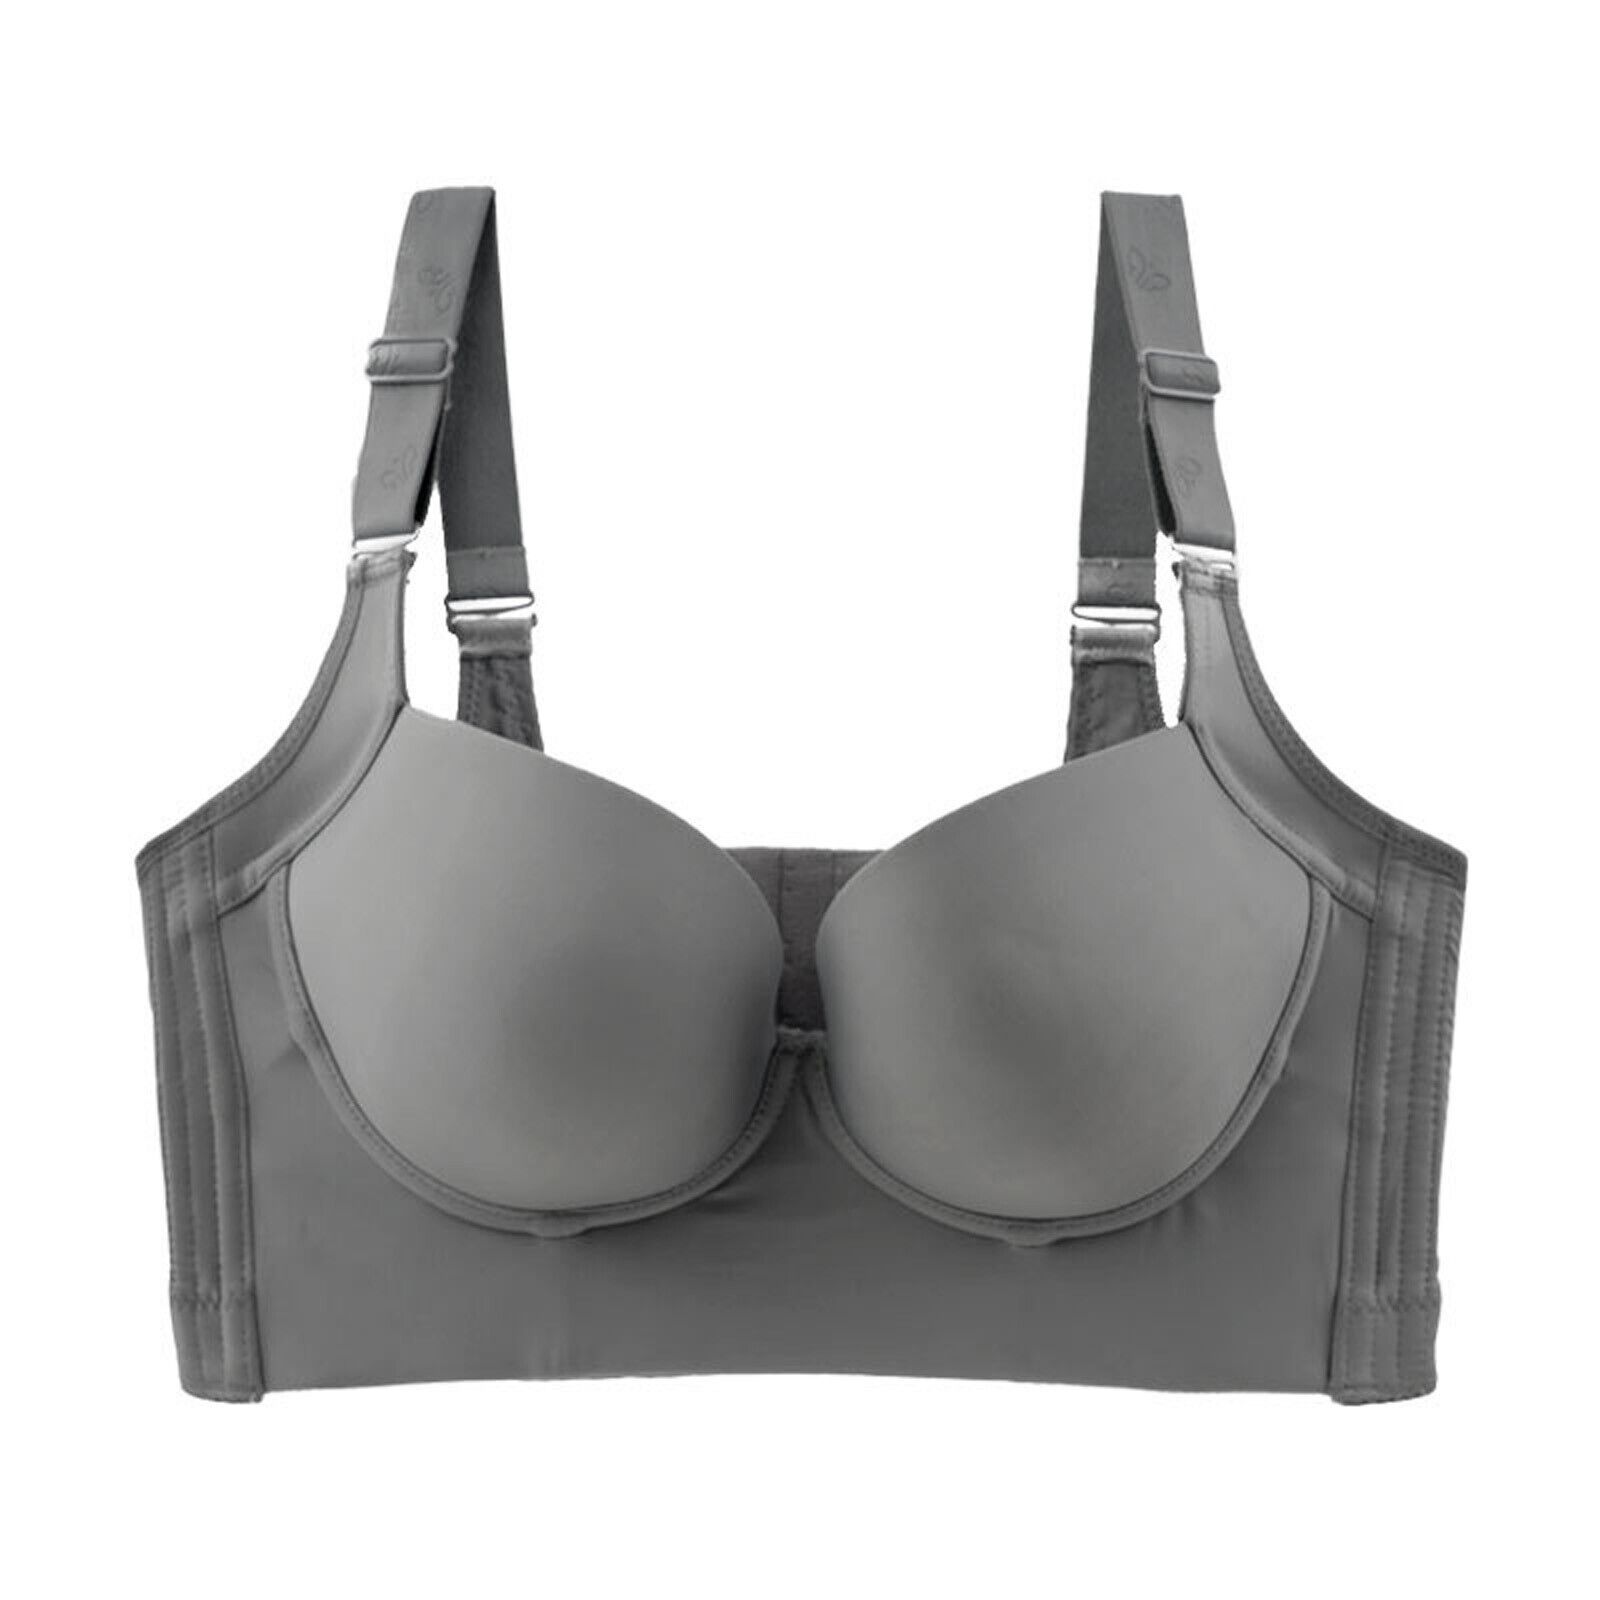 Fashion Deep Cup Bra Hides Back Fat Diva Look Bra With